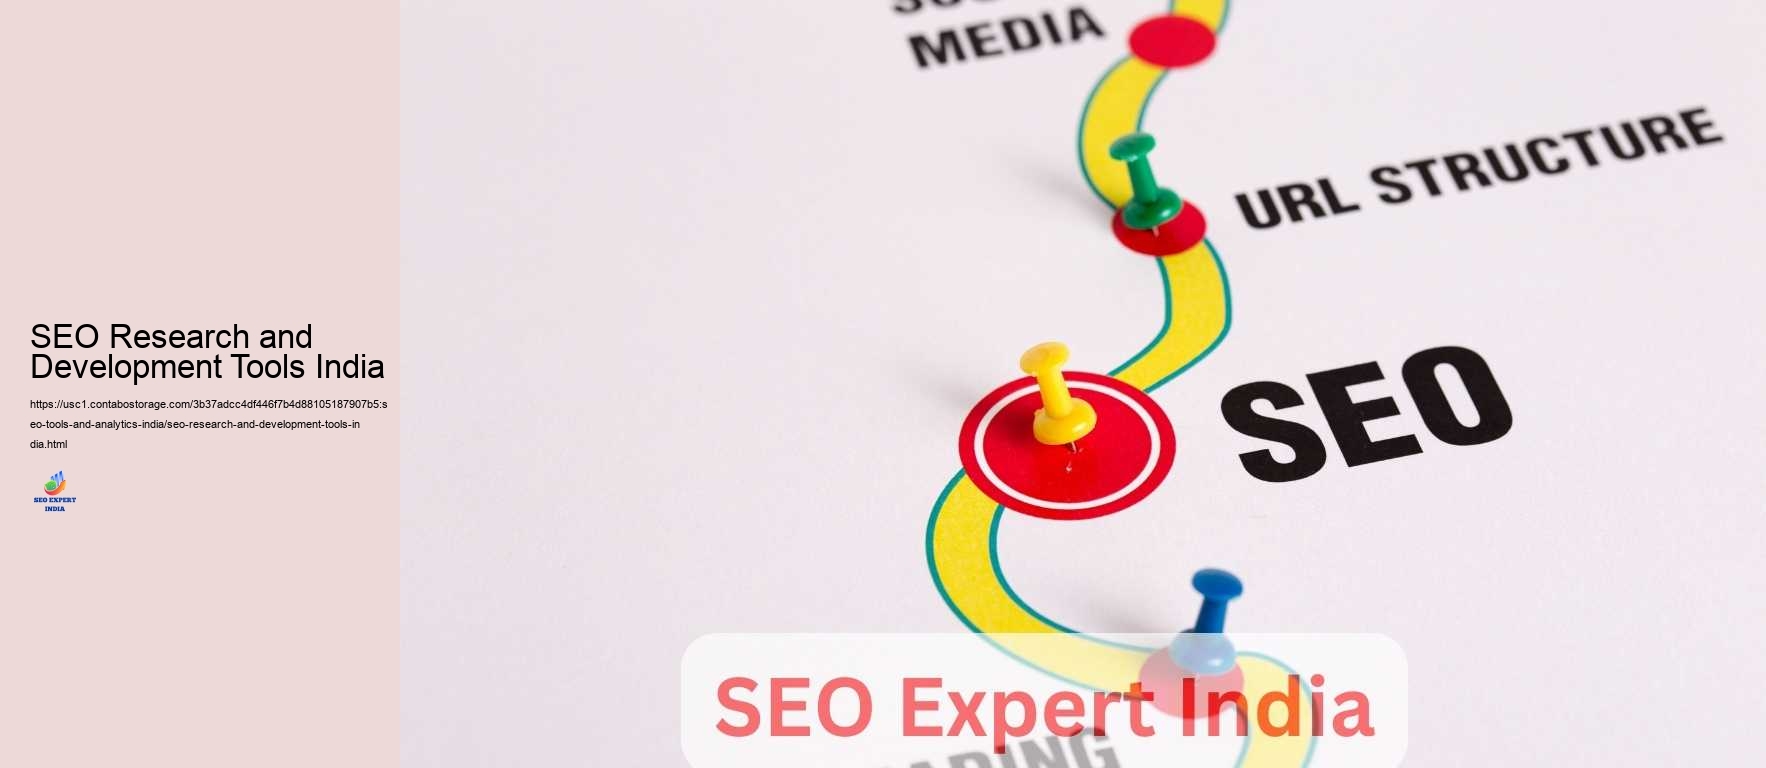 SEO Research and Development Tools India